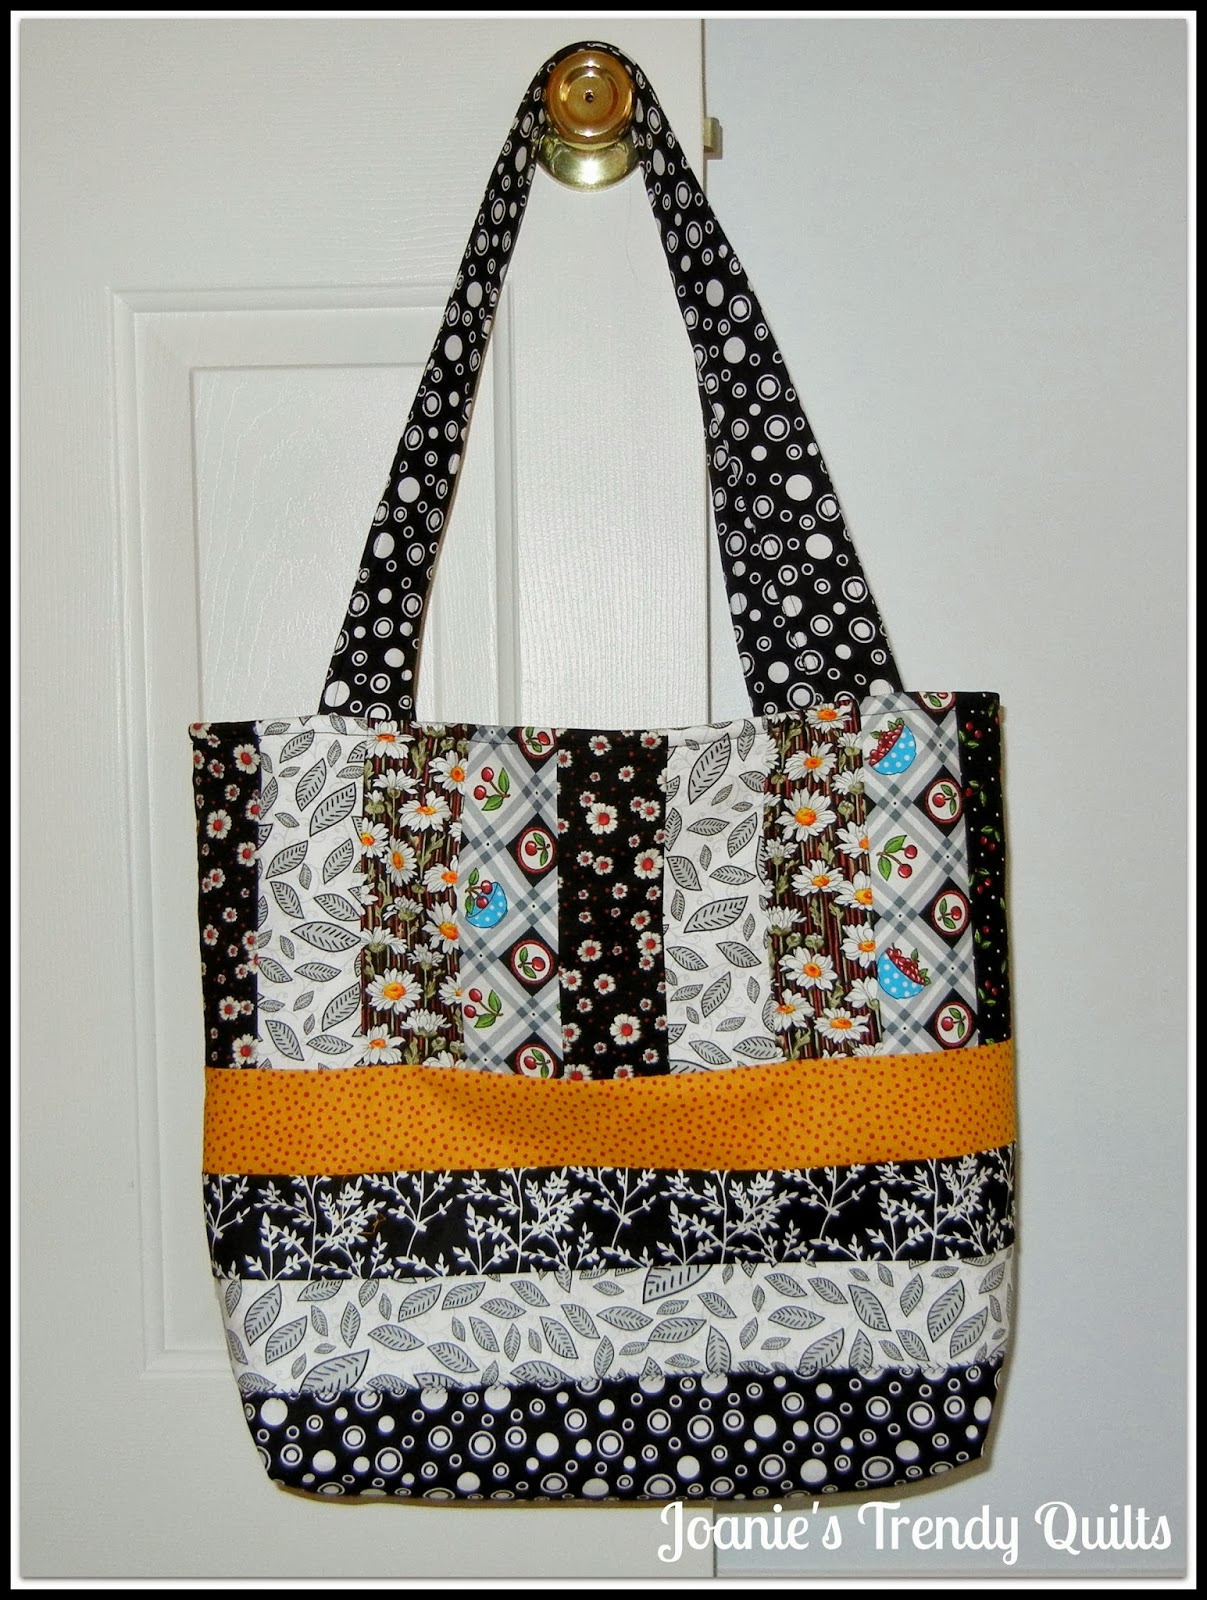 Joanie's Trendy Quilts : Basically Black and White